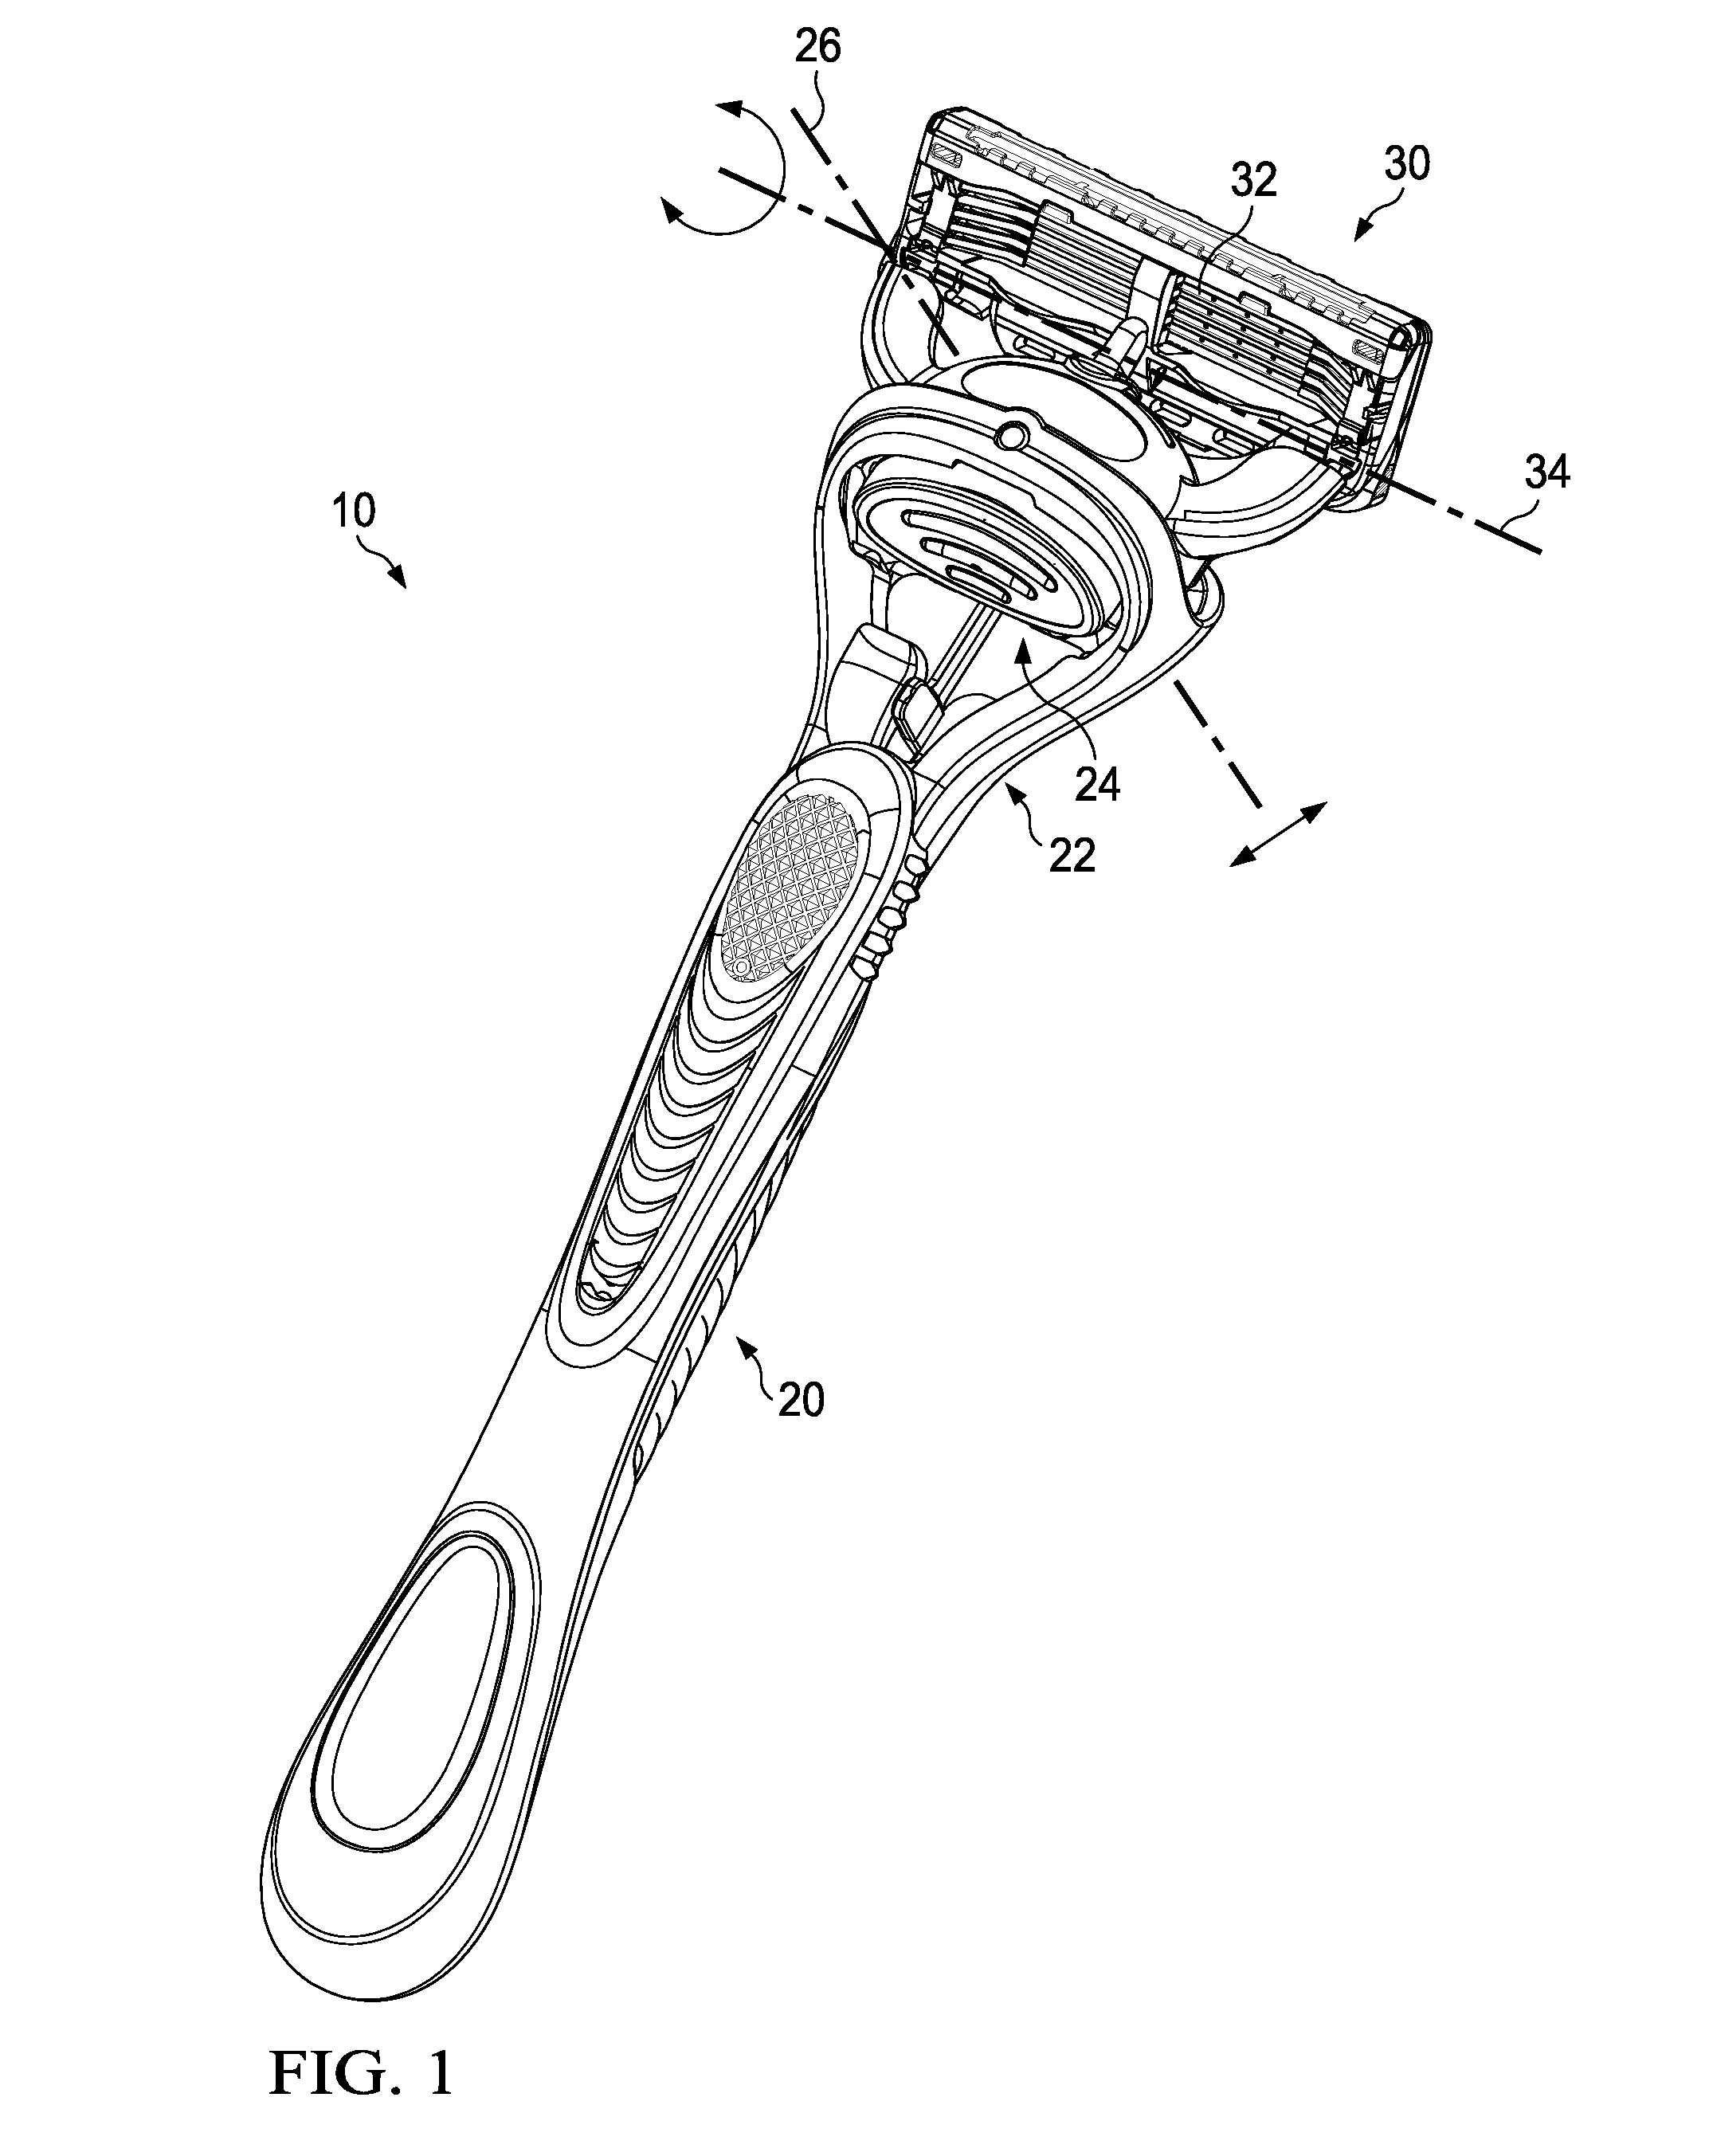 Razor handle with a rotatable portion